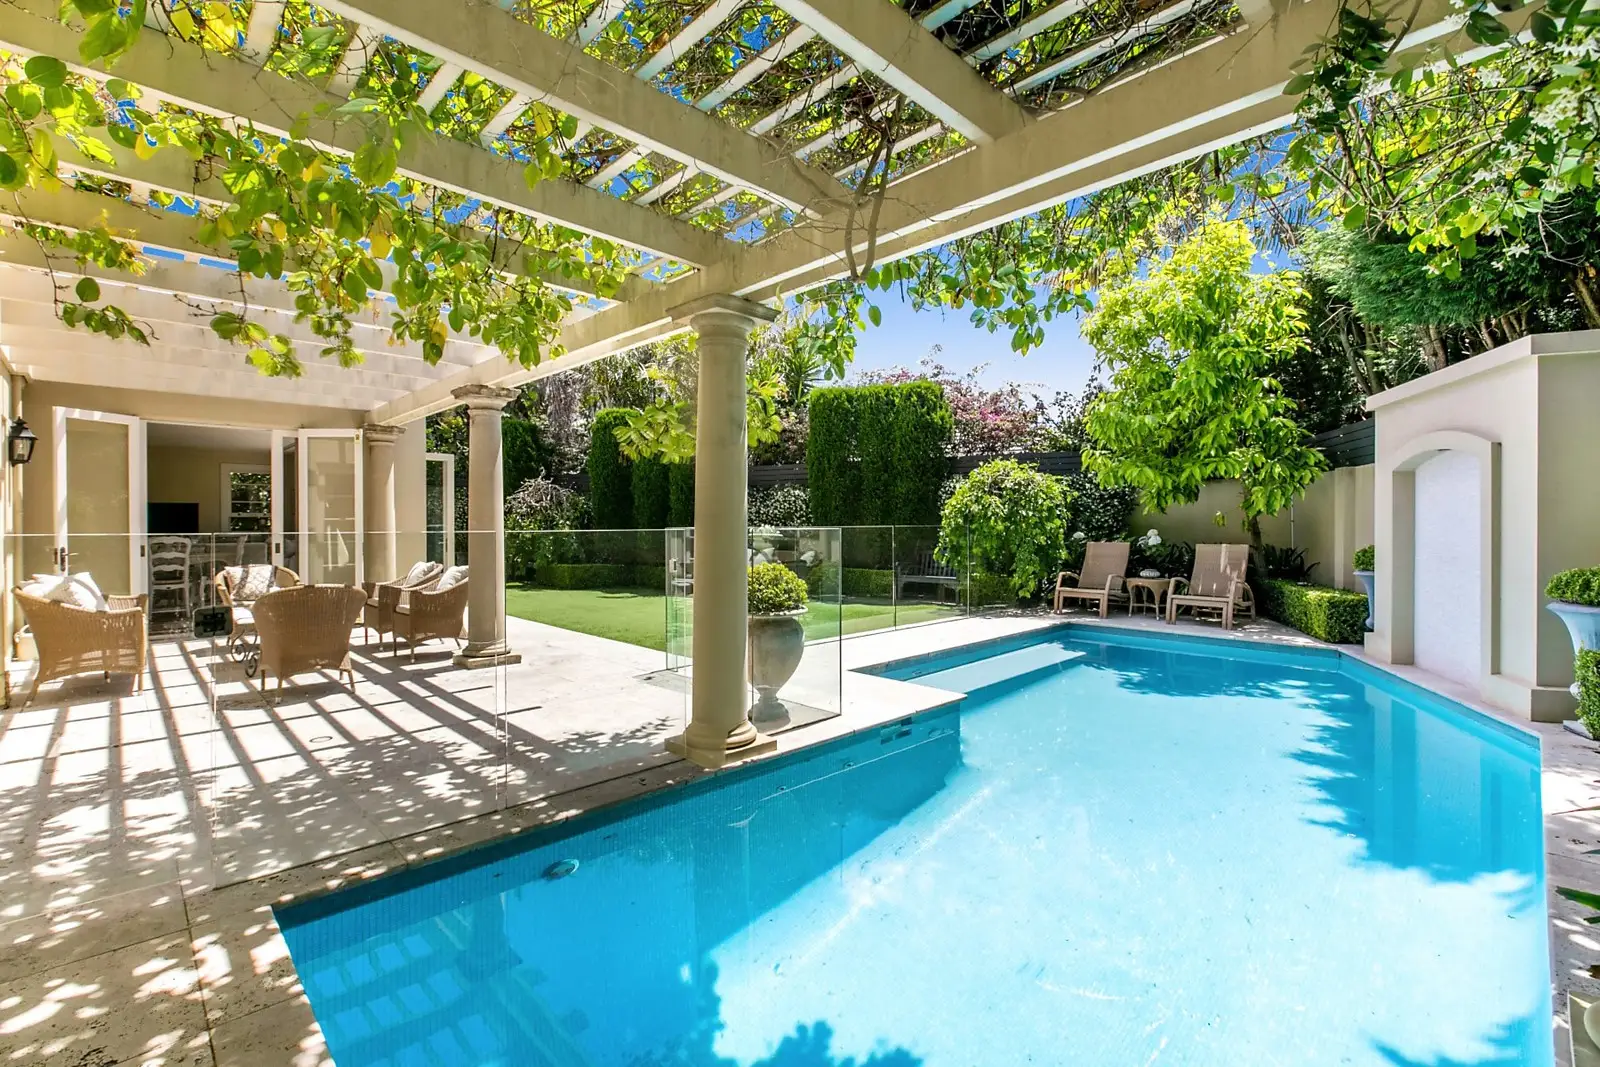 Photo #2: 59 Captain Pipers Road, Vaucluse - Sold by Sydney Sotheby's International Realty